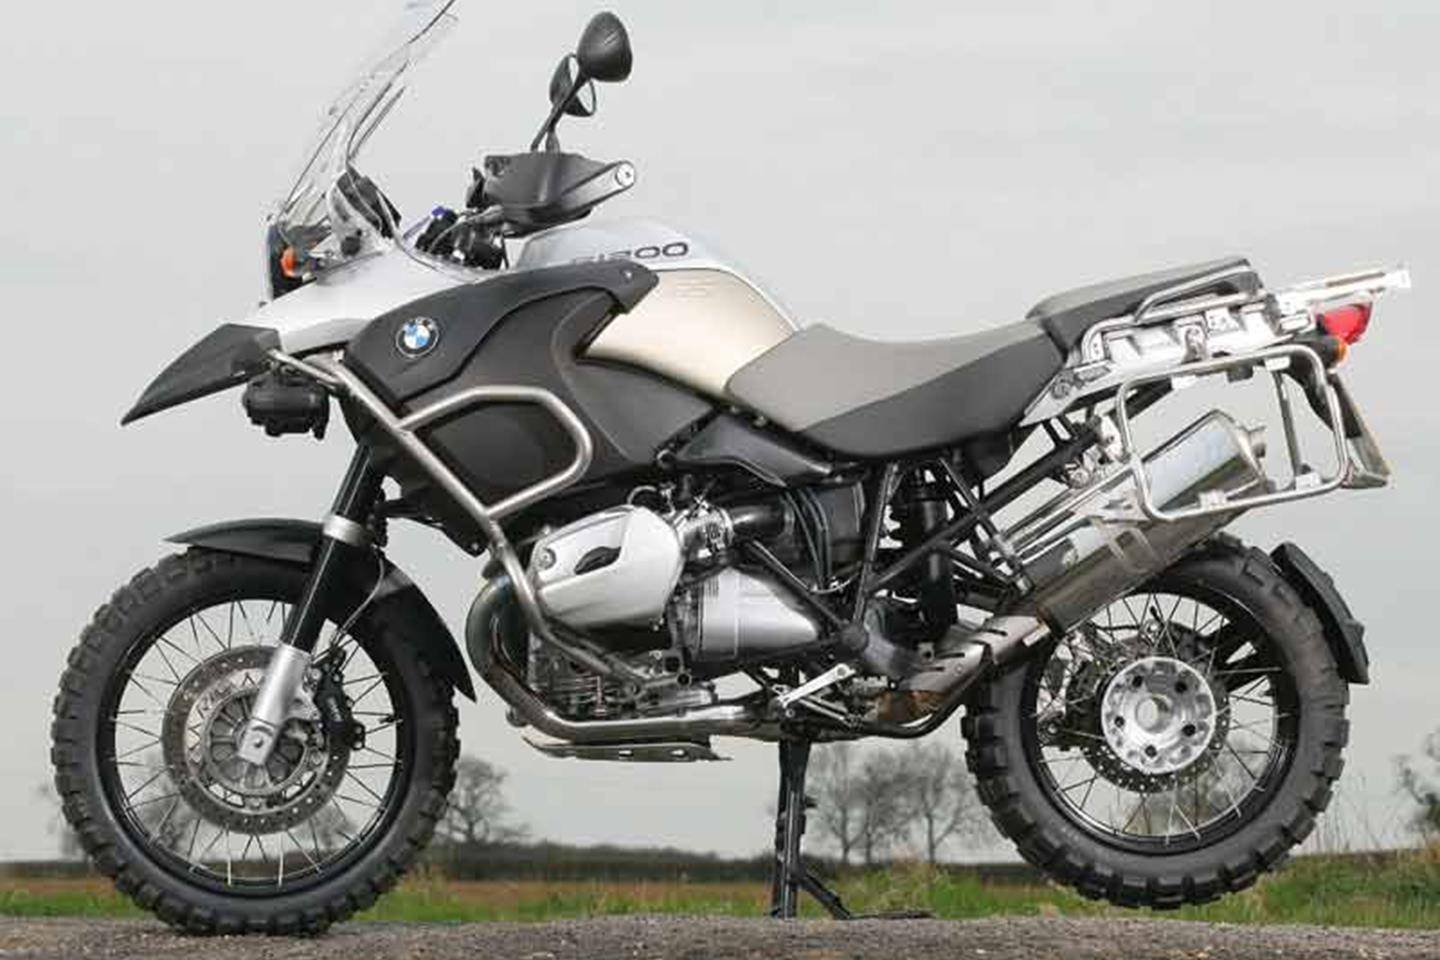 2017 bmw motorrad r 1200 gs adventure owner's and service manuals online & download pdf